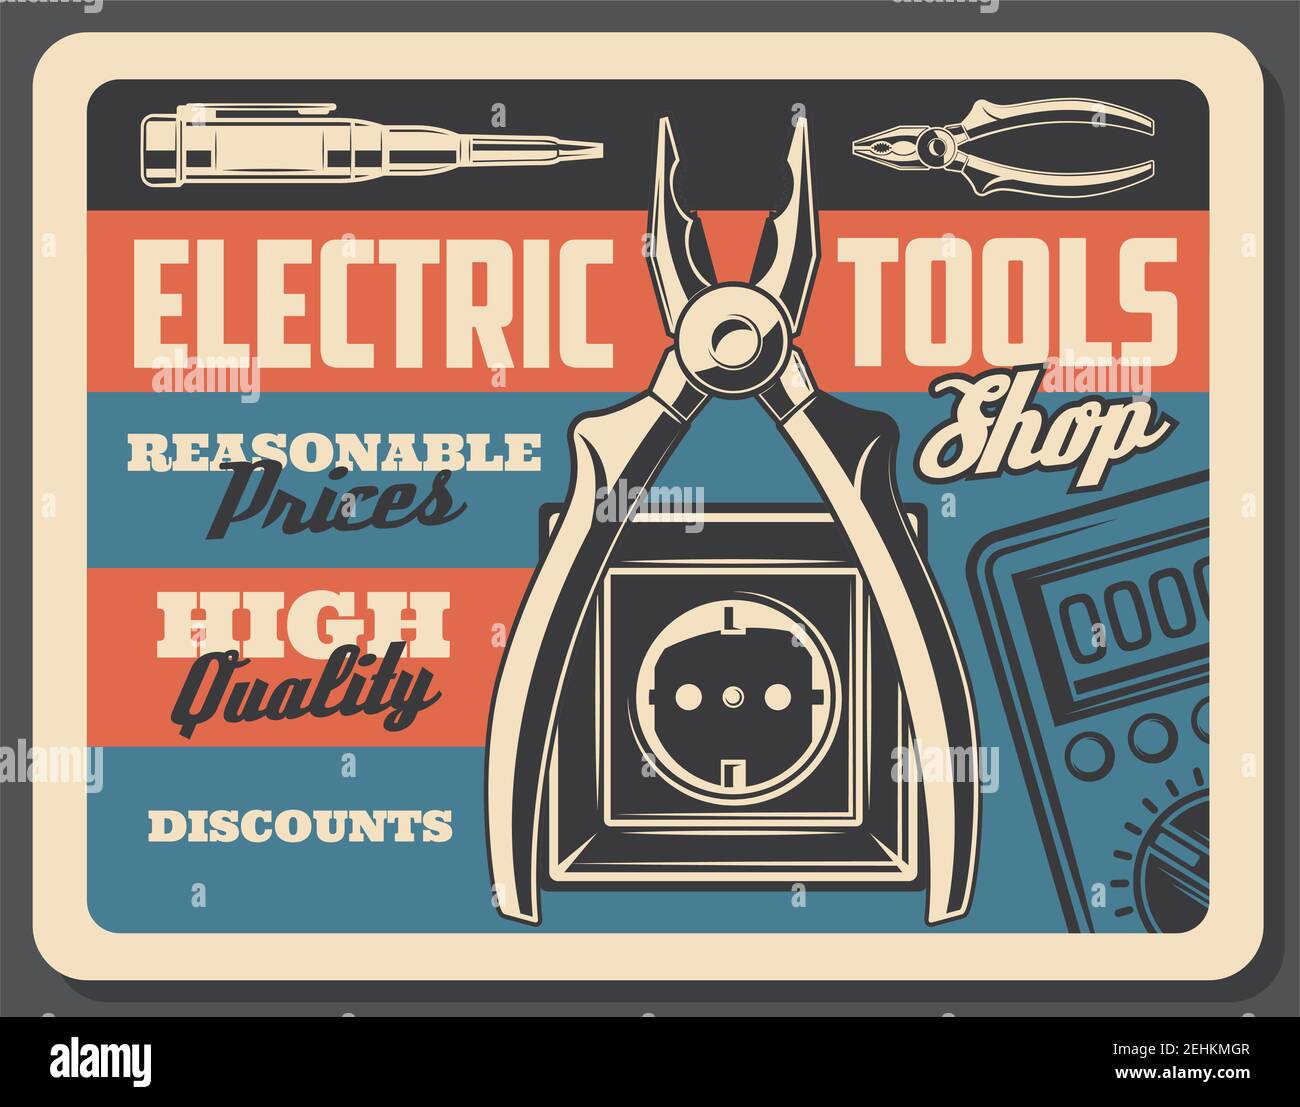 Electrical tools vintage poster, electricity power and energy store signboard. Vector retro design of electric plug and socket, voltmeter tester and w Stock Vector